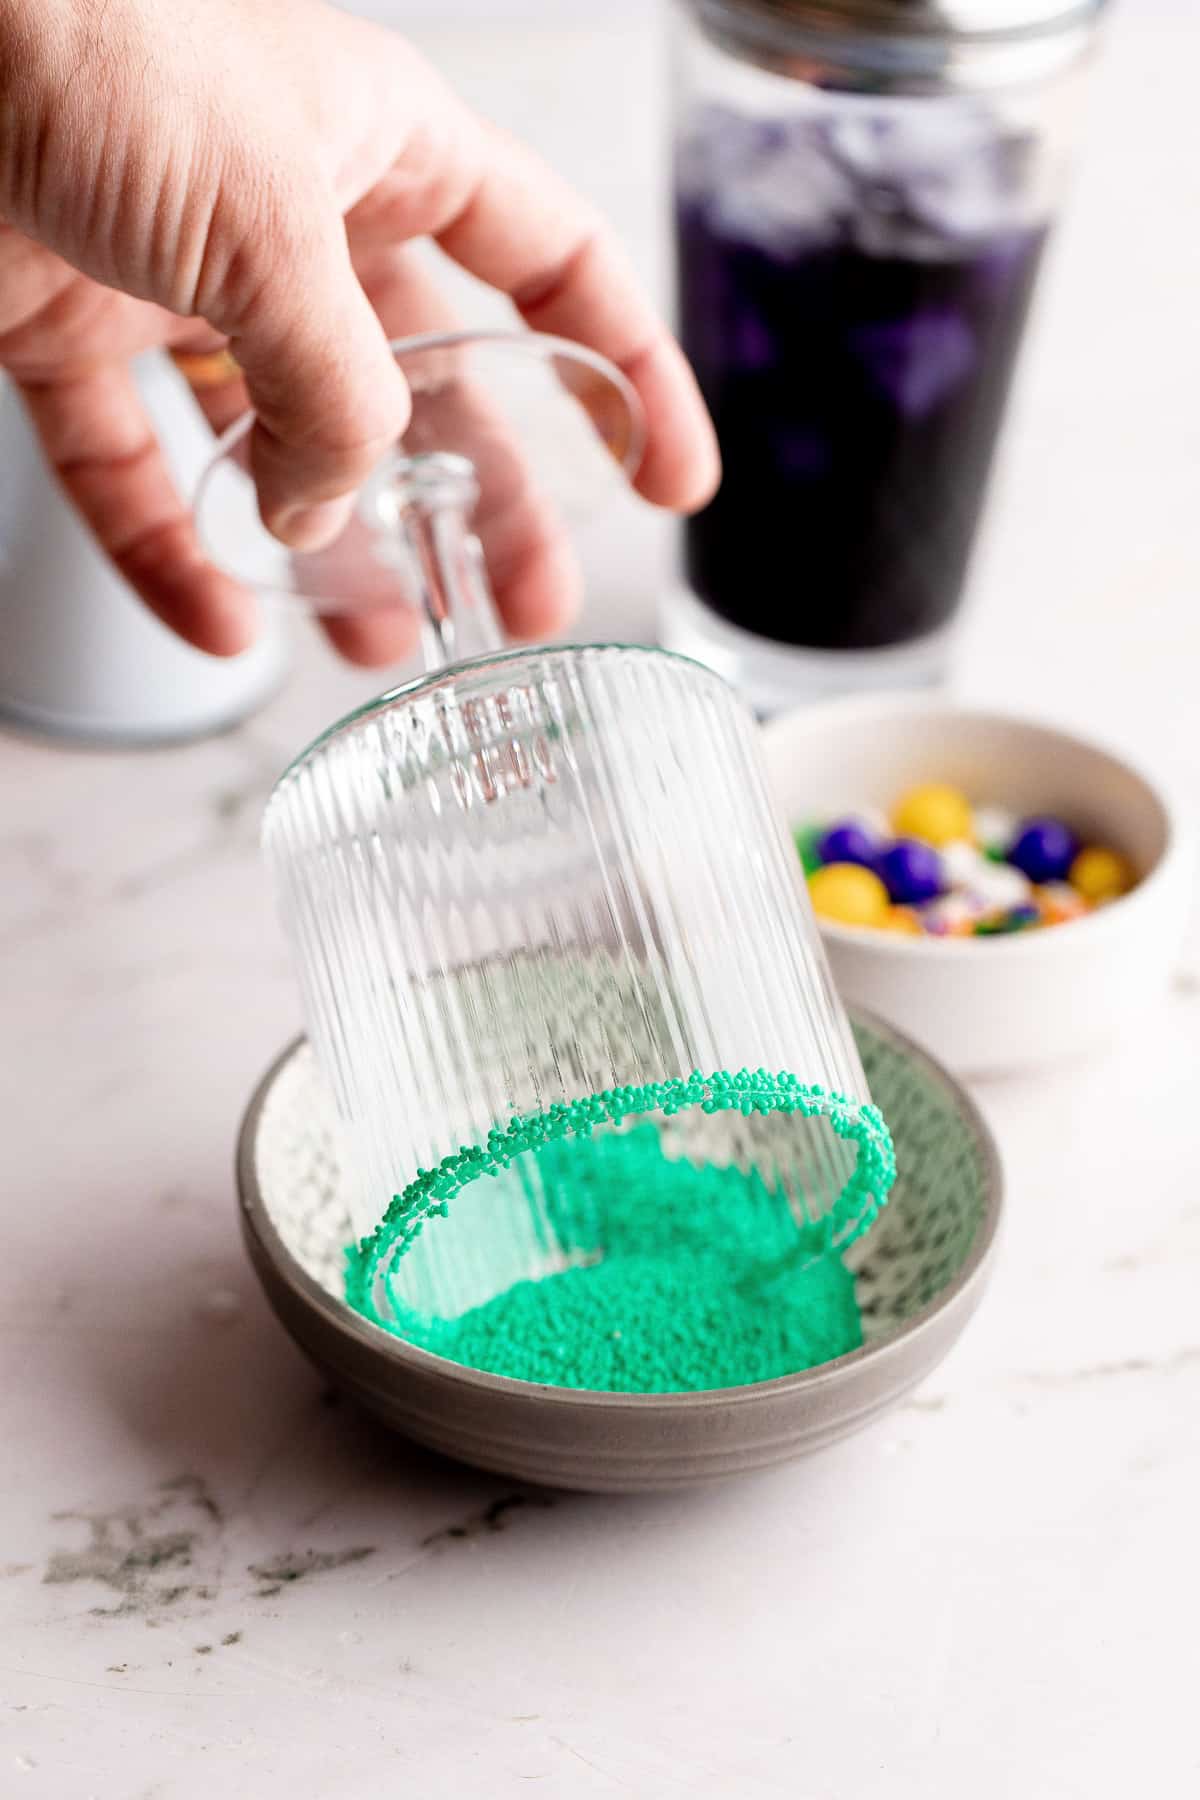 A glass being dipped into green sprinkles.